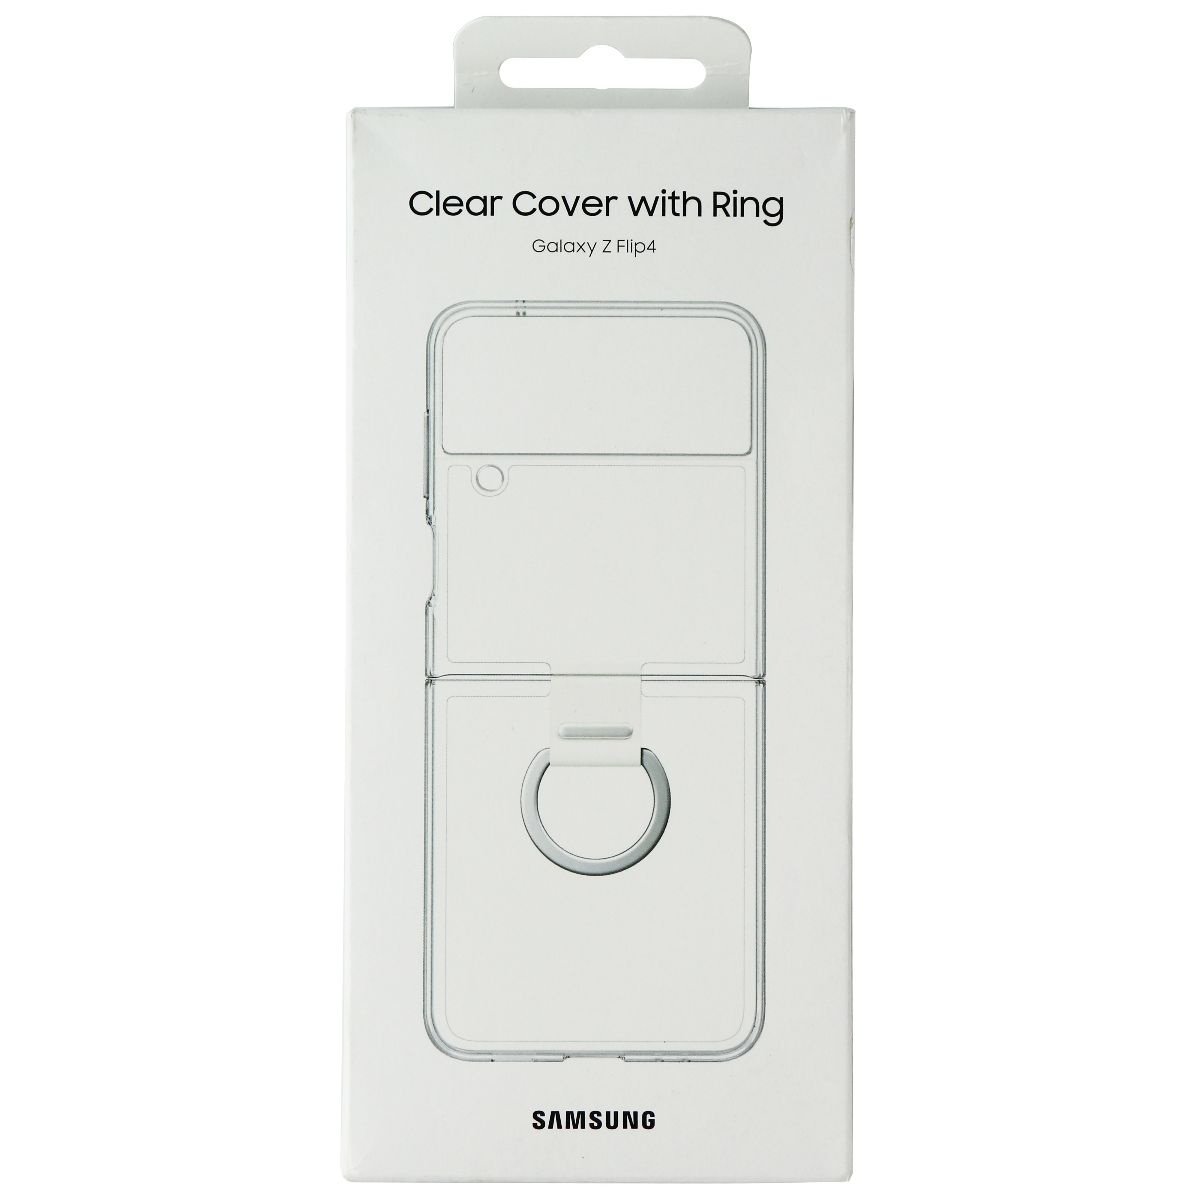 Samsung Clear Cover With Ring For Samsung Galaxy Z Flip4 - Clear